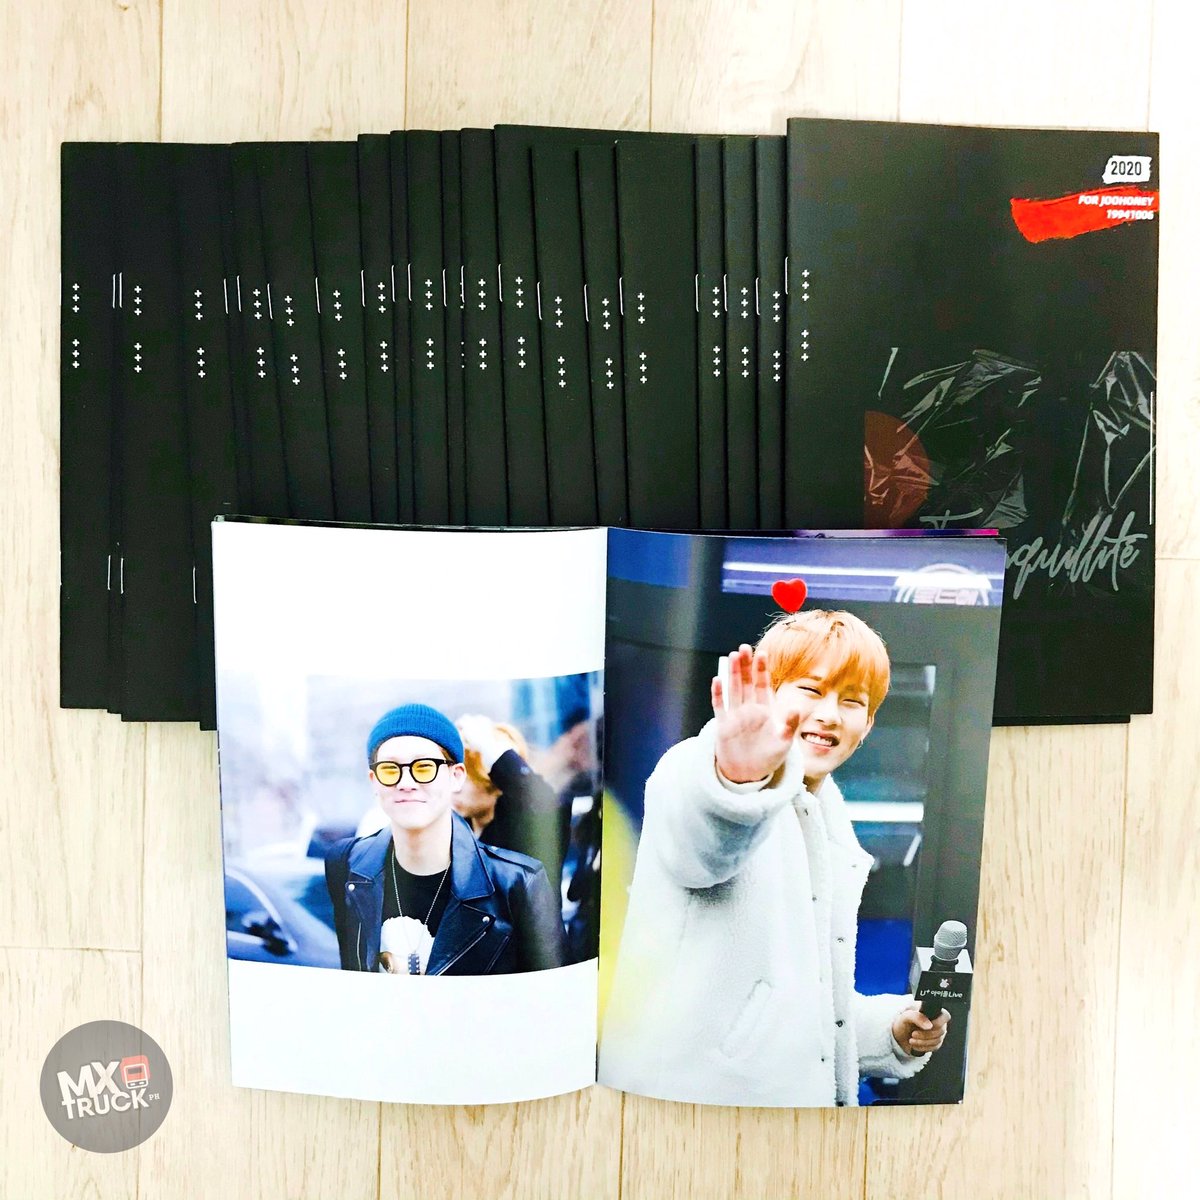 [#MXTPHUpdate] Received Joohoney’s Tranquillité mini photobooks from @ONANDON_1006! Thank you so much. 😇